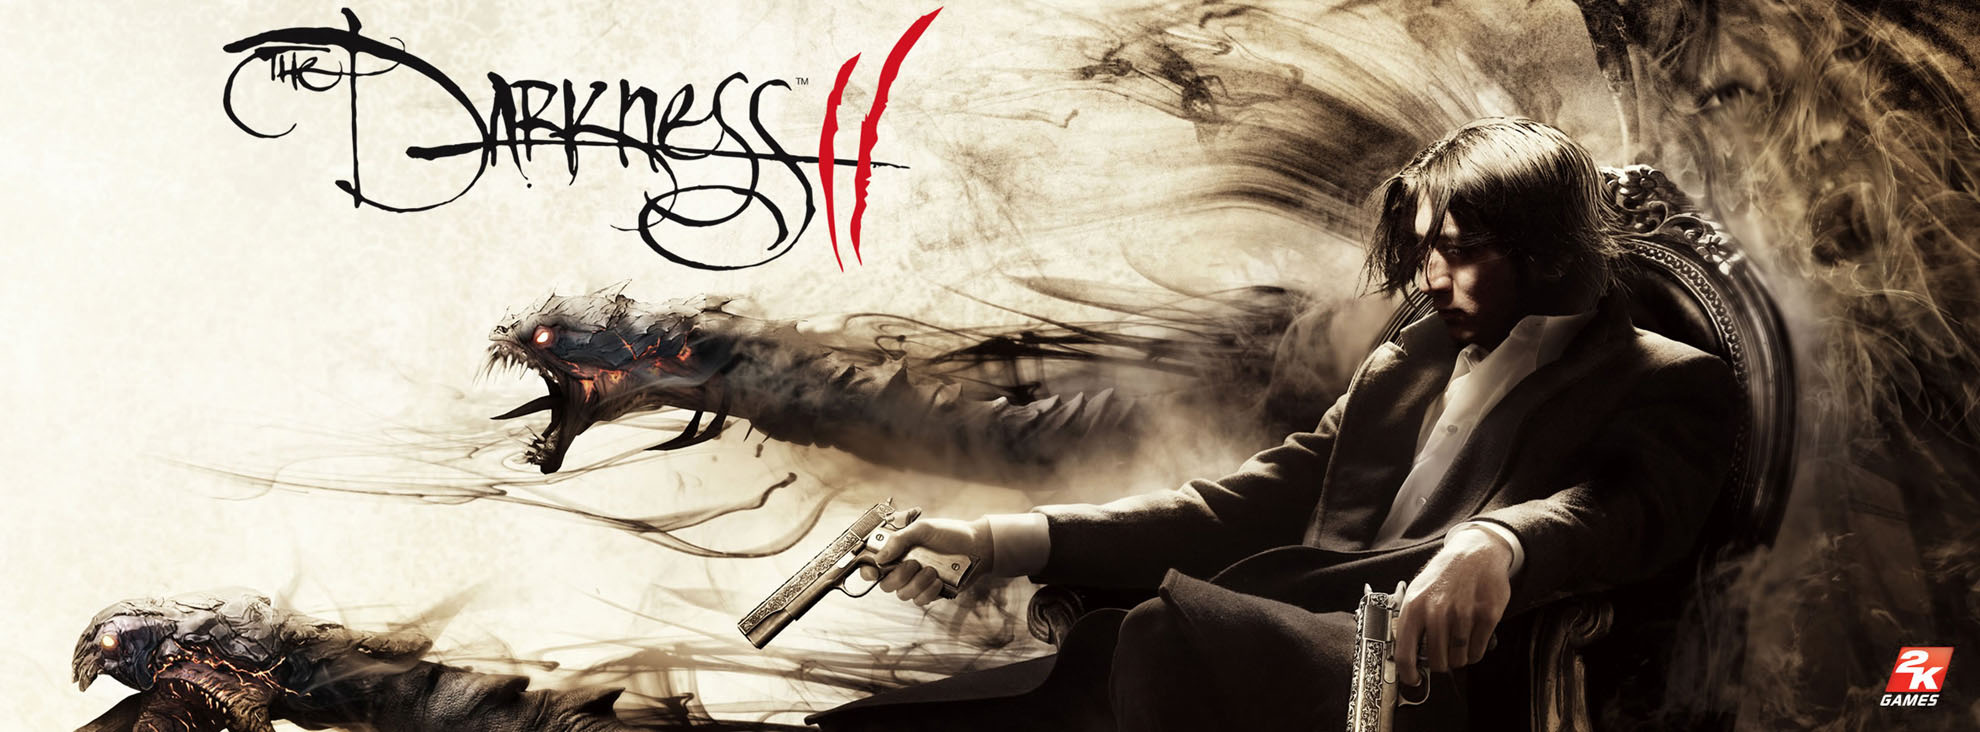 The Darkness II Official Cover Art Image